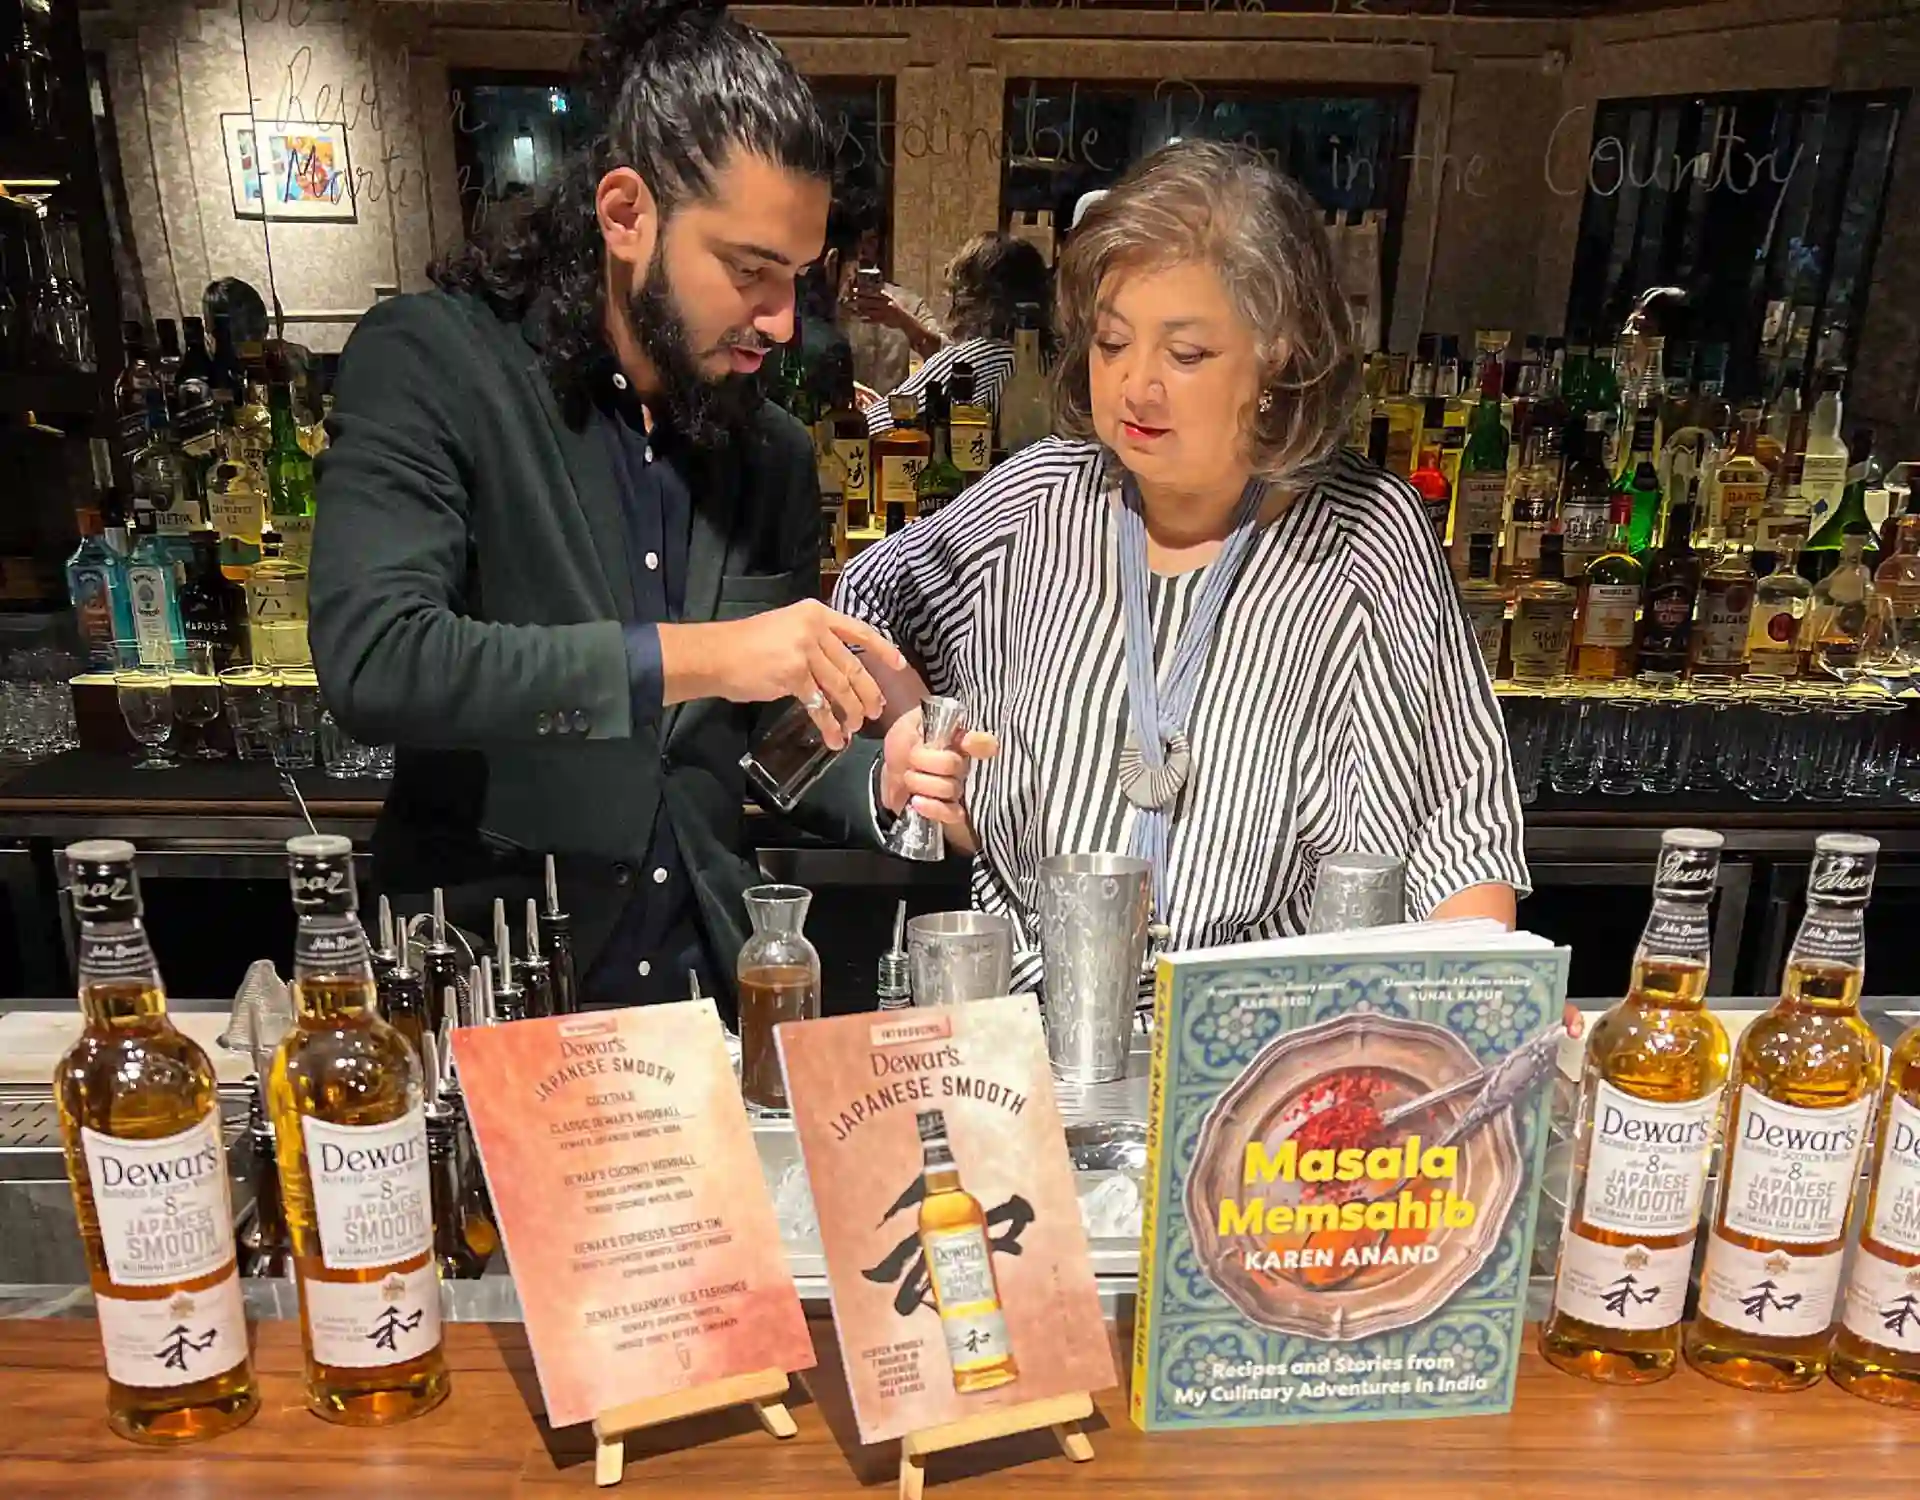 The bartender is instructing cocktail mixing techniques during a book launch event at Cobbler and Crew.